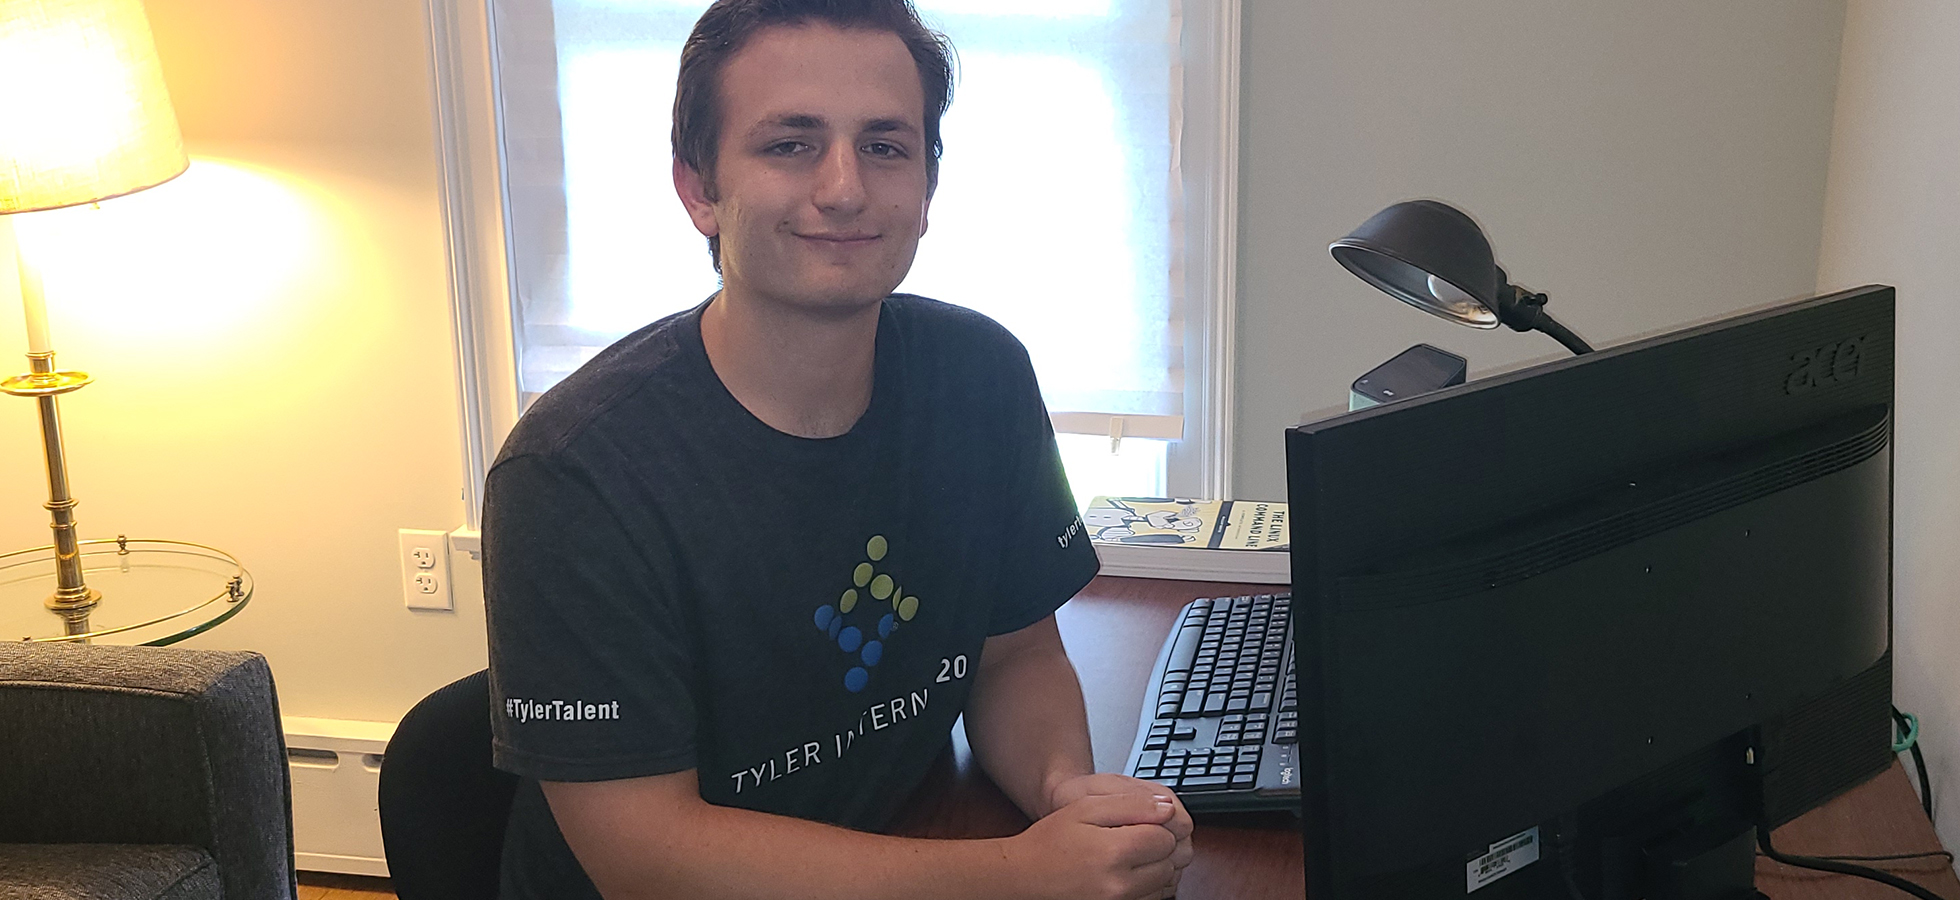 Photo of Michael O'Reilly sitting at a desk. O'Reilly is a computer science and cybersecurity major who is interning with Tyler Technologies this summer.